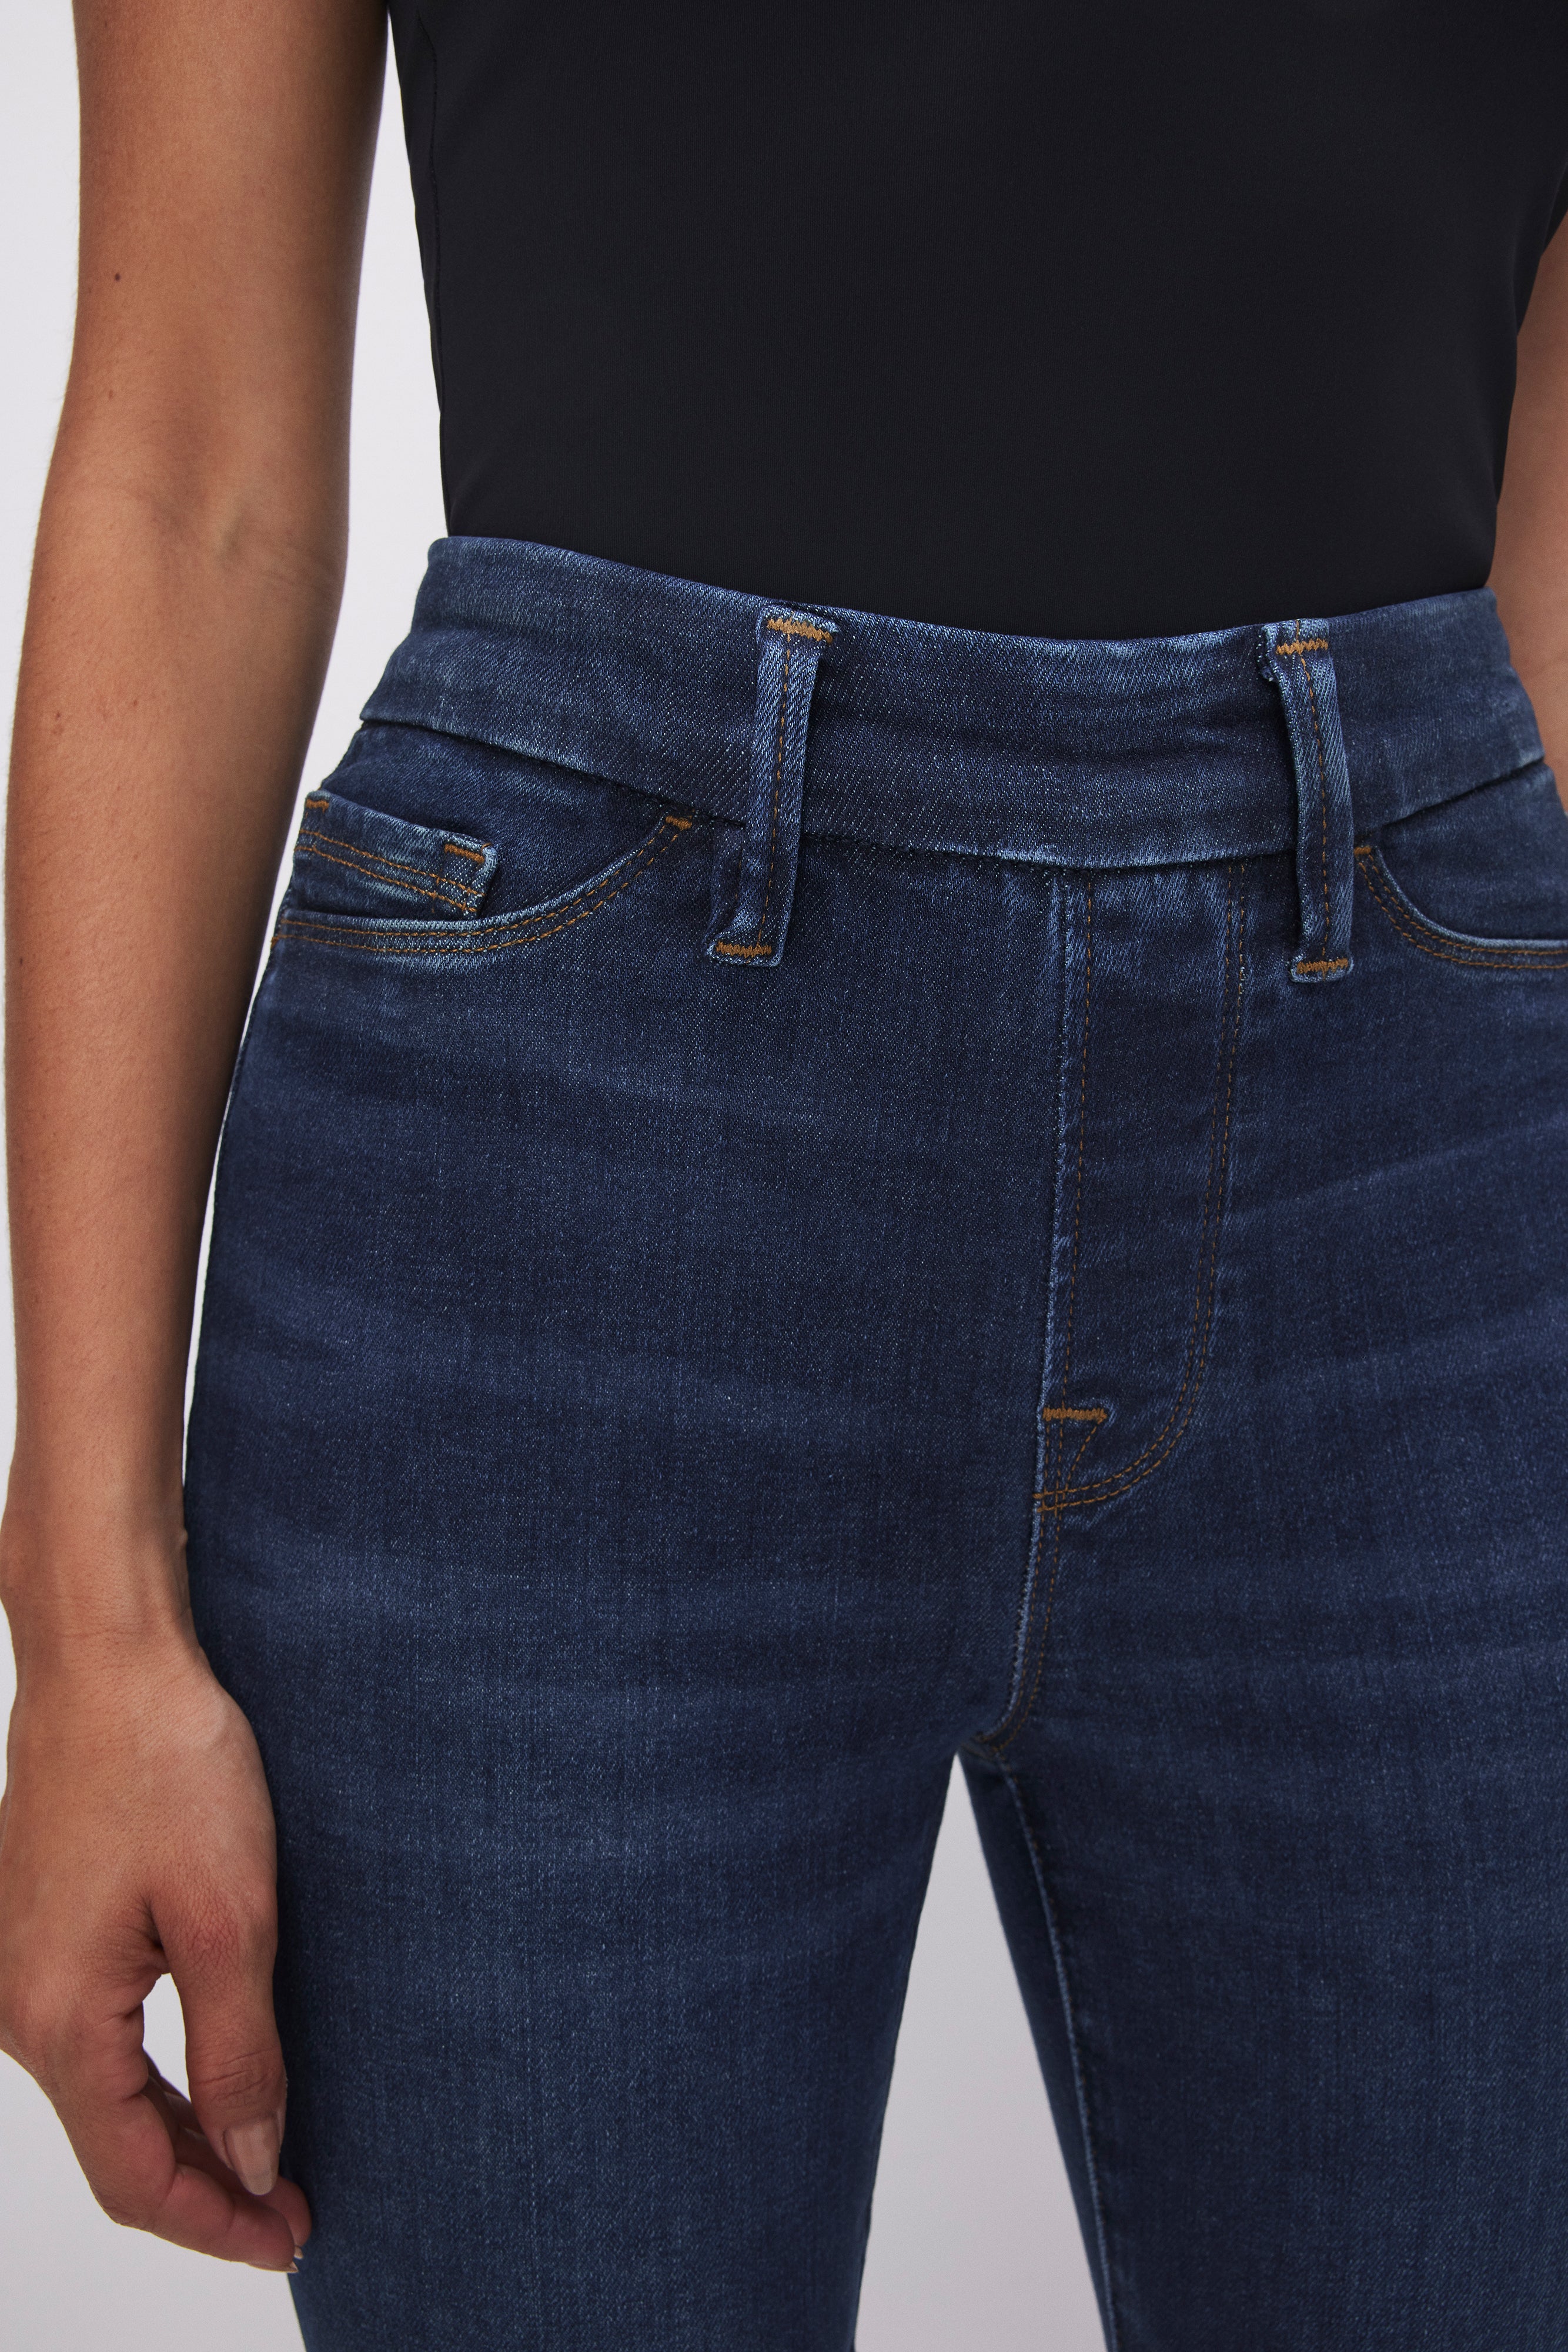 Good American Jeans Review: Stretchy Jeans That Help Shape Your Figure